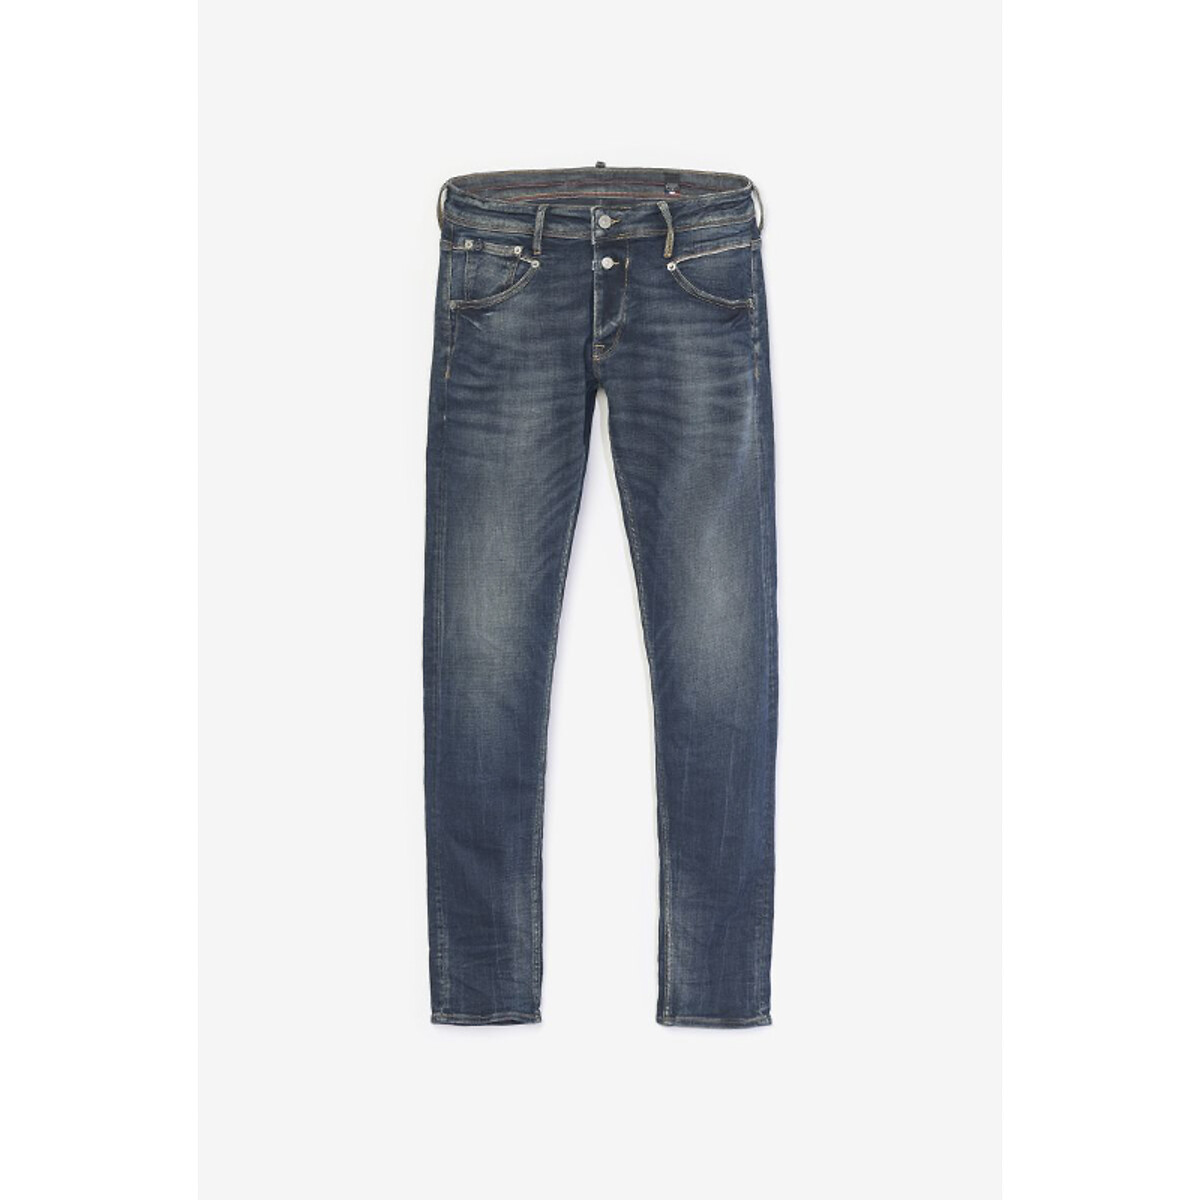 700/11 Jeans in Slim Fit and Mid Rise